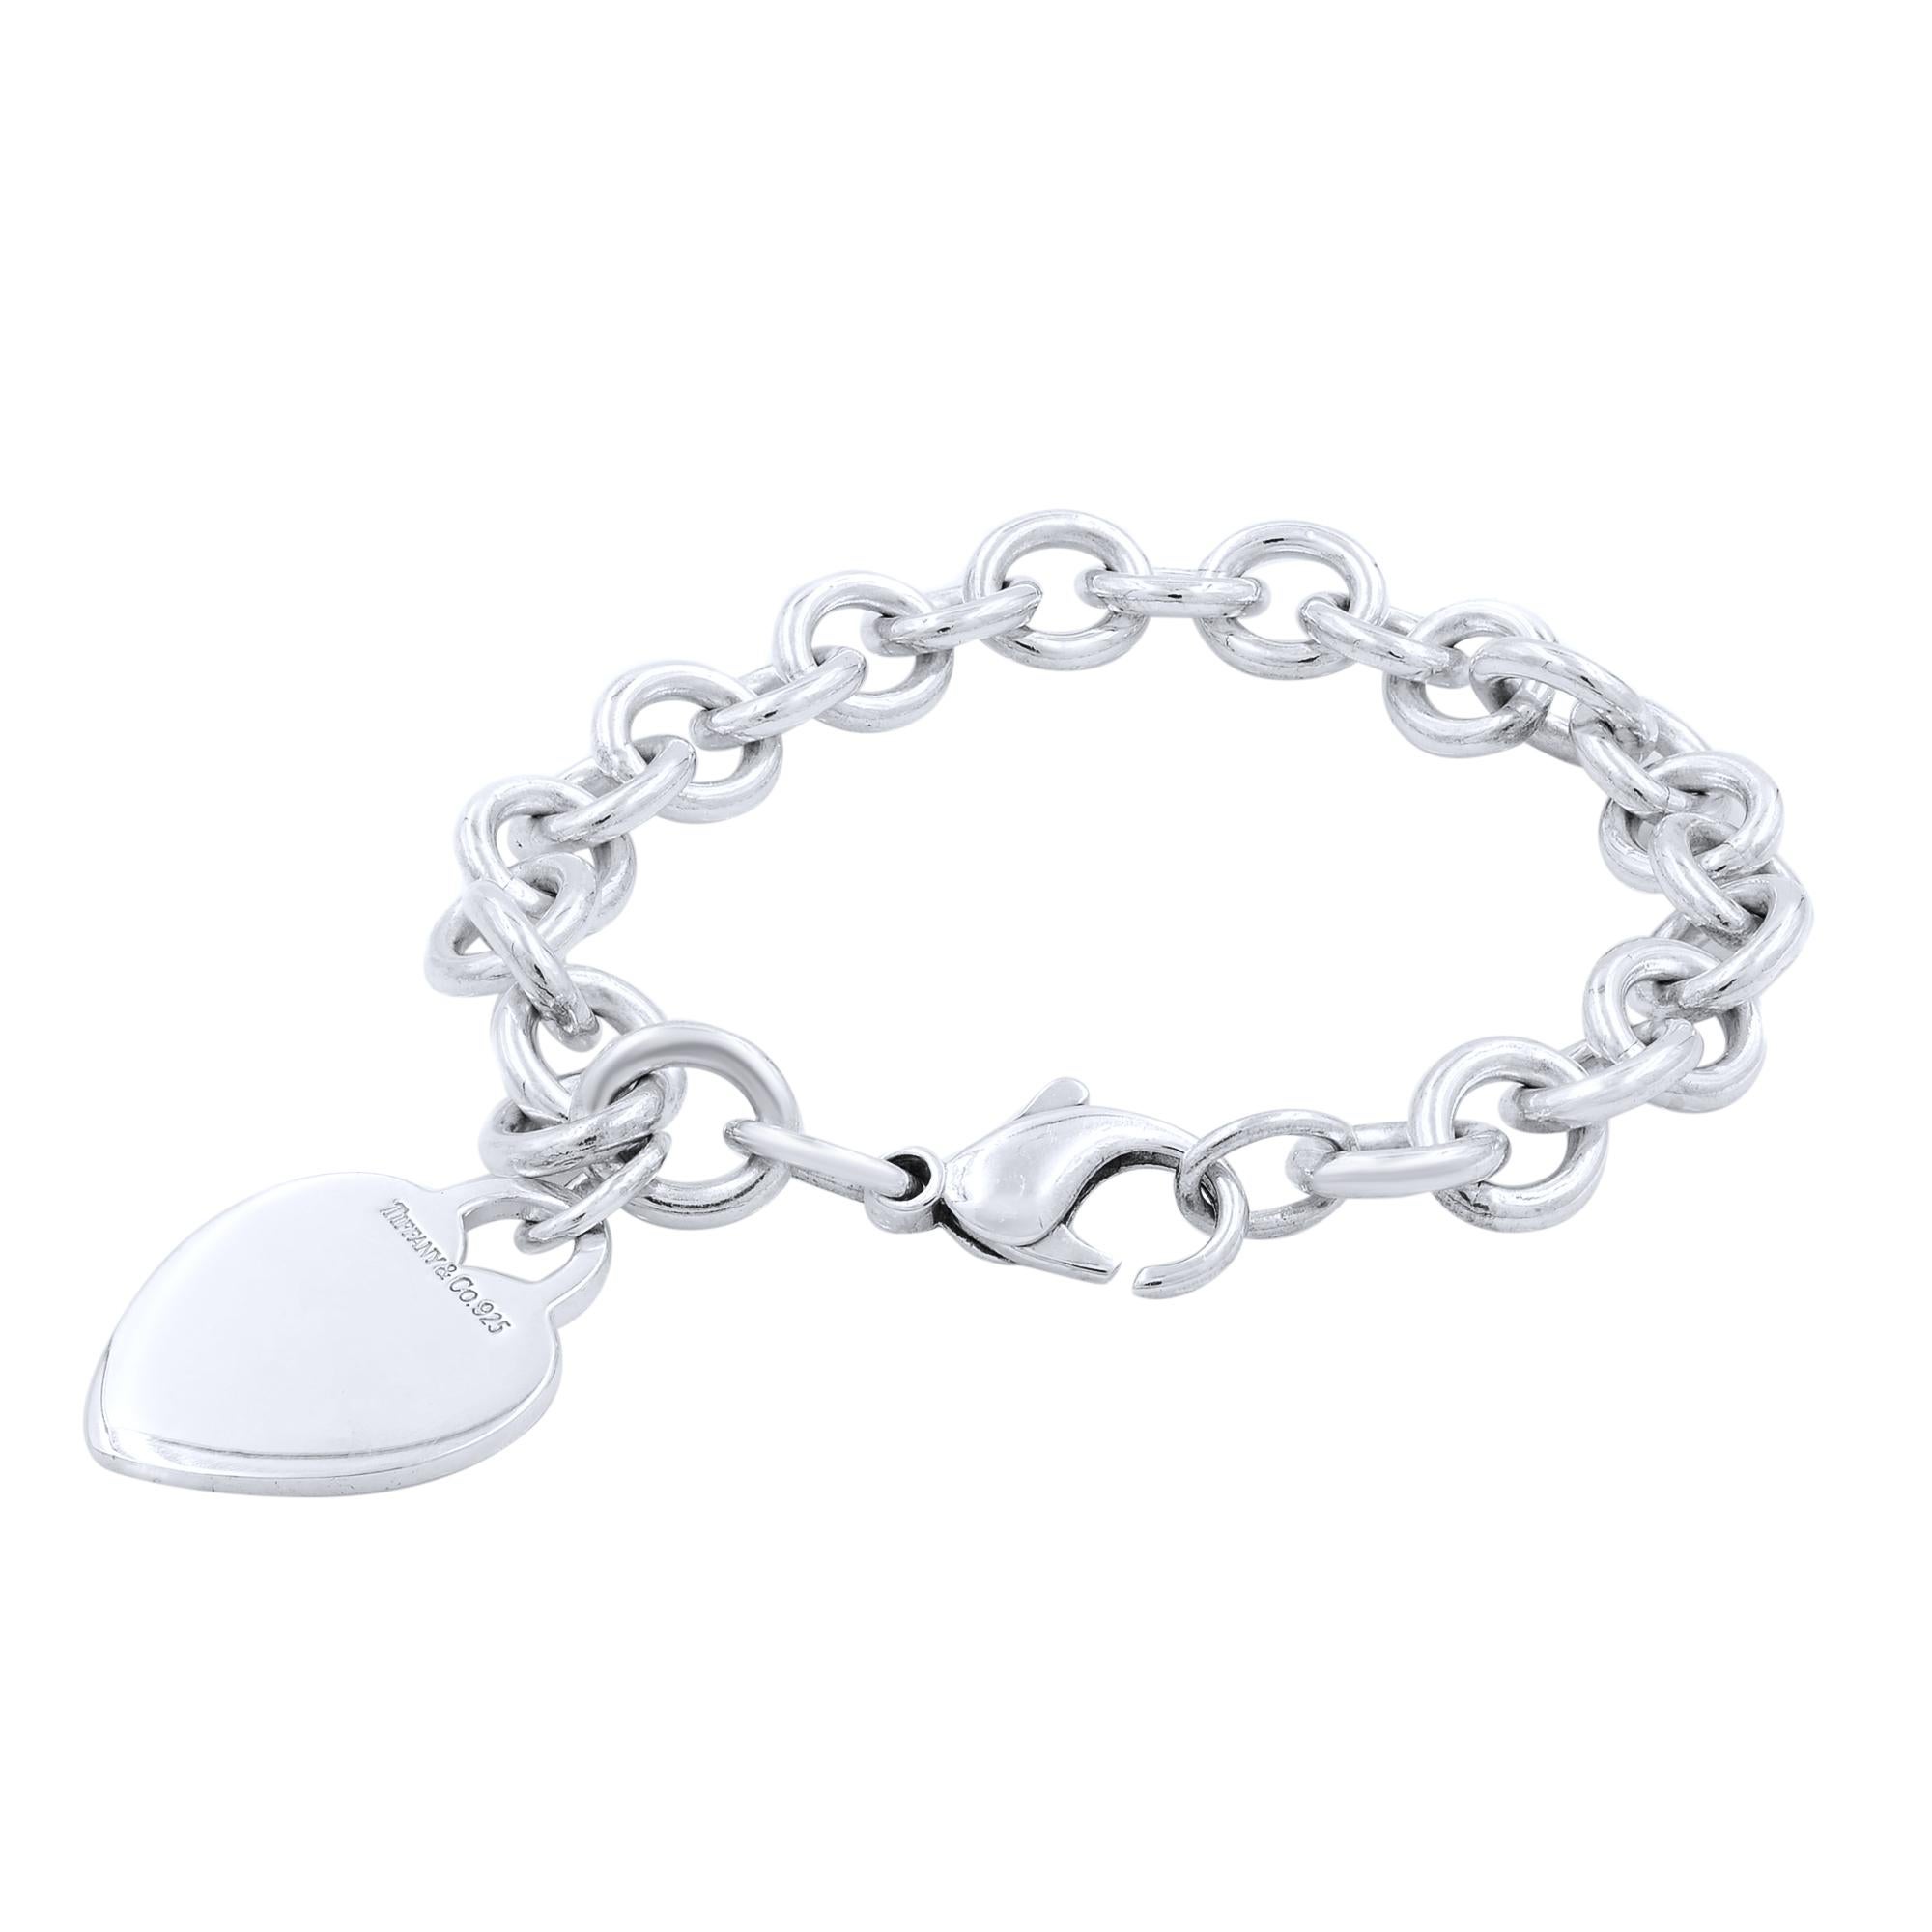 An elite authentic bracelet from Tiffany & Co., forged from silver with a fine polished finish, it features a sturdy oval chain link bracelet with a solid heart tag charm. The bracelet has a large lobster clasp and it has full designer signature